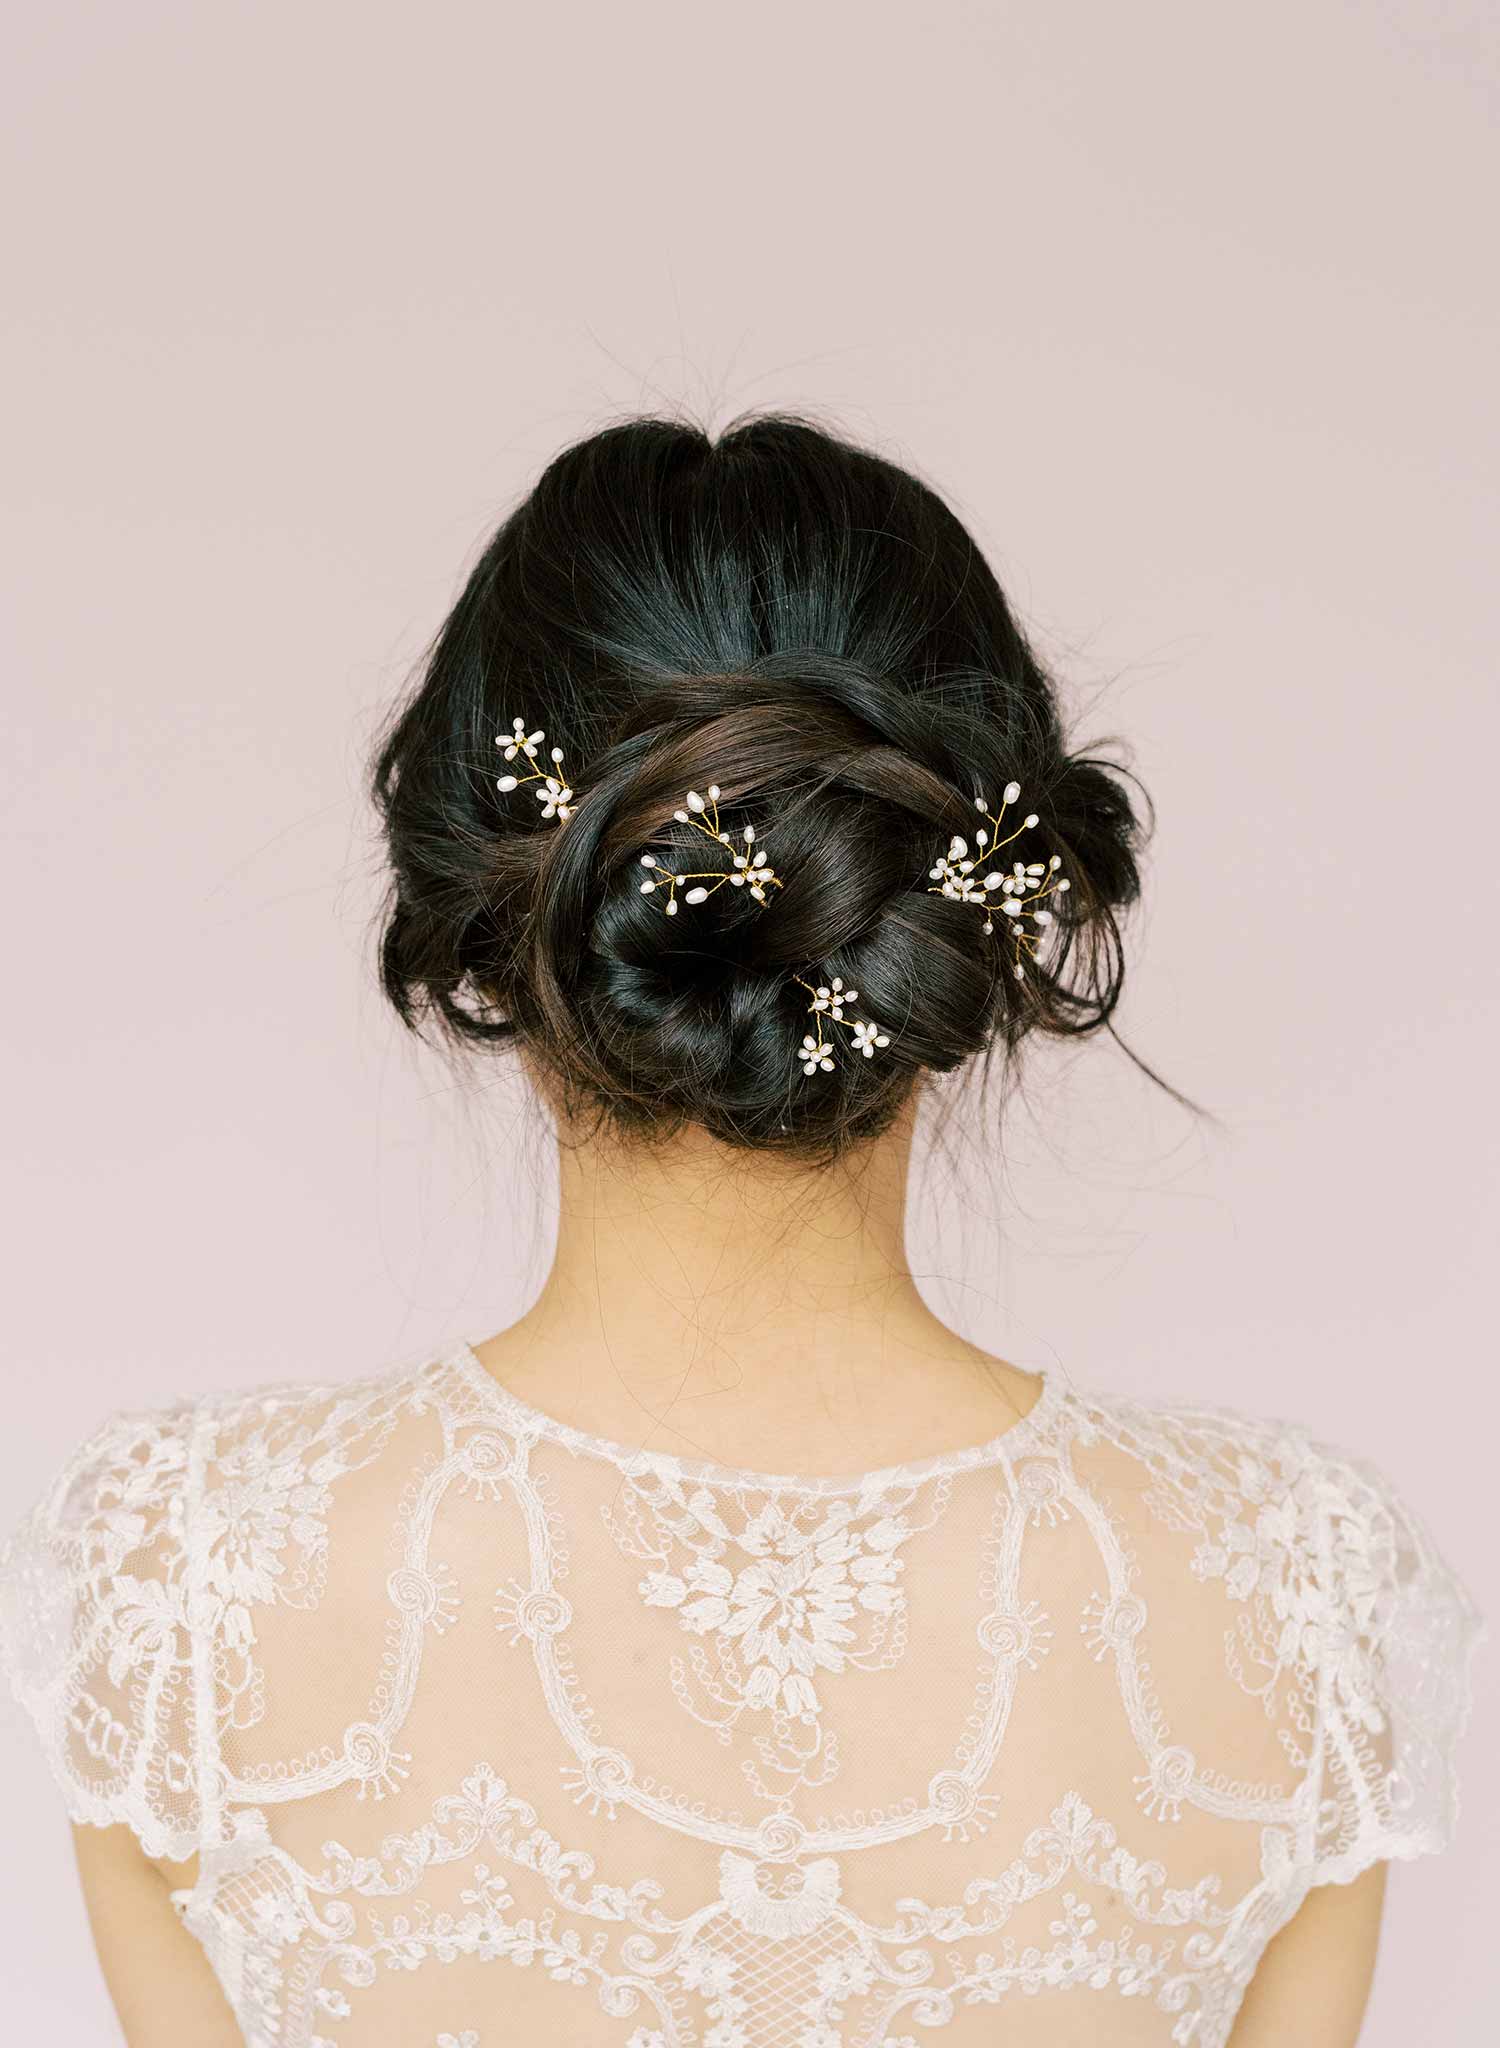 Bridal Hairpin Set by Twigs & Honey, Wedding Accessories - Pearlescent Flowers Bridal Hair Pin Set of 3 - Style #2077